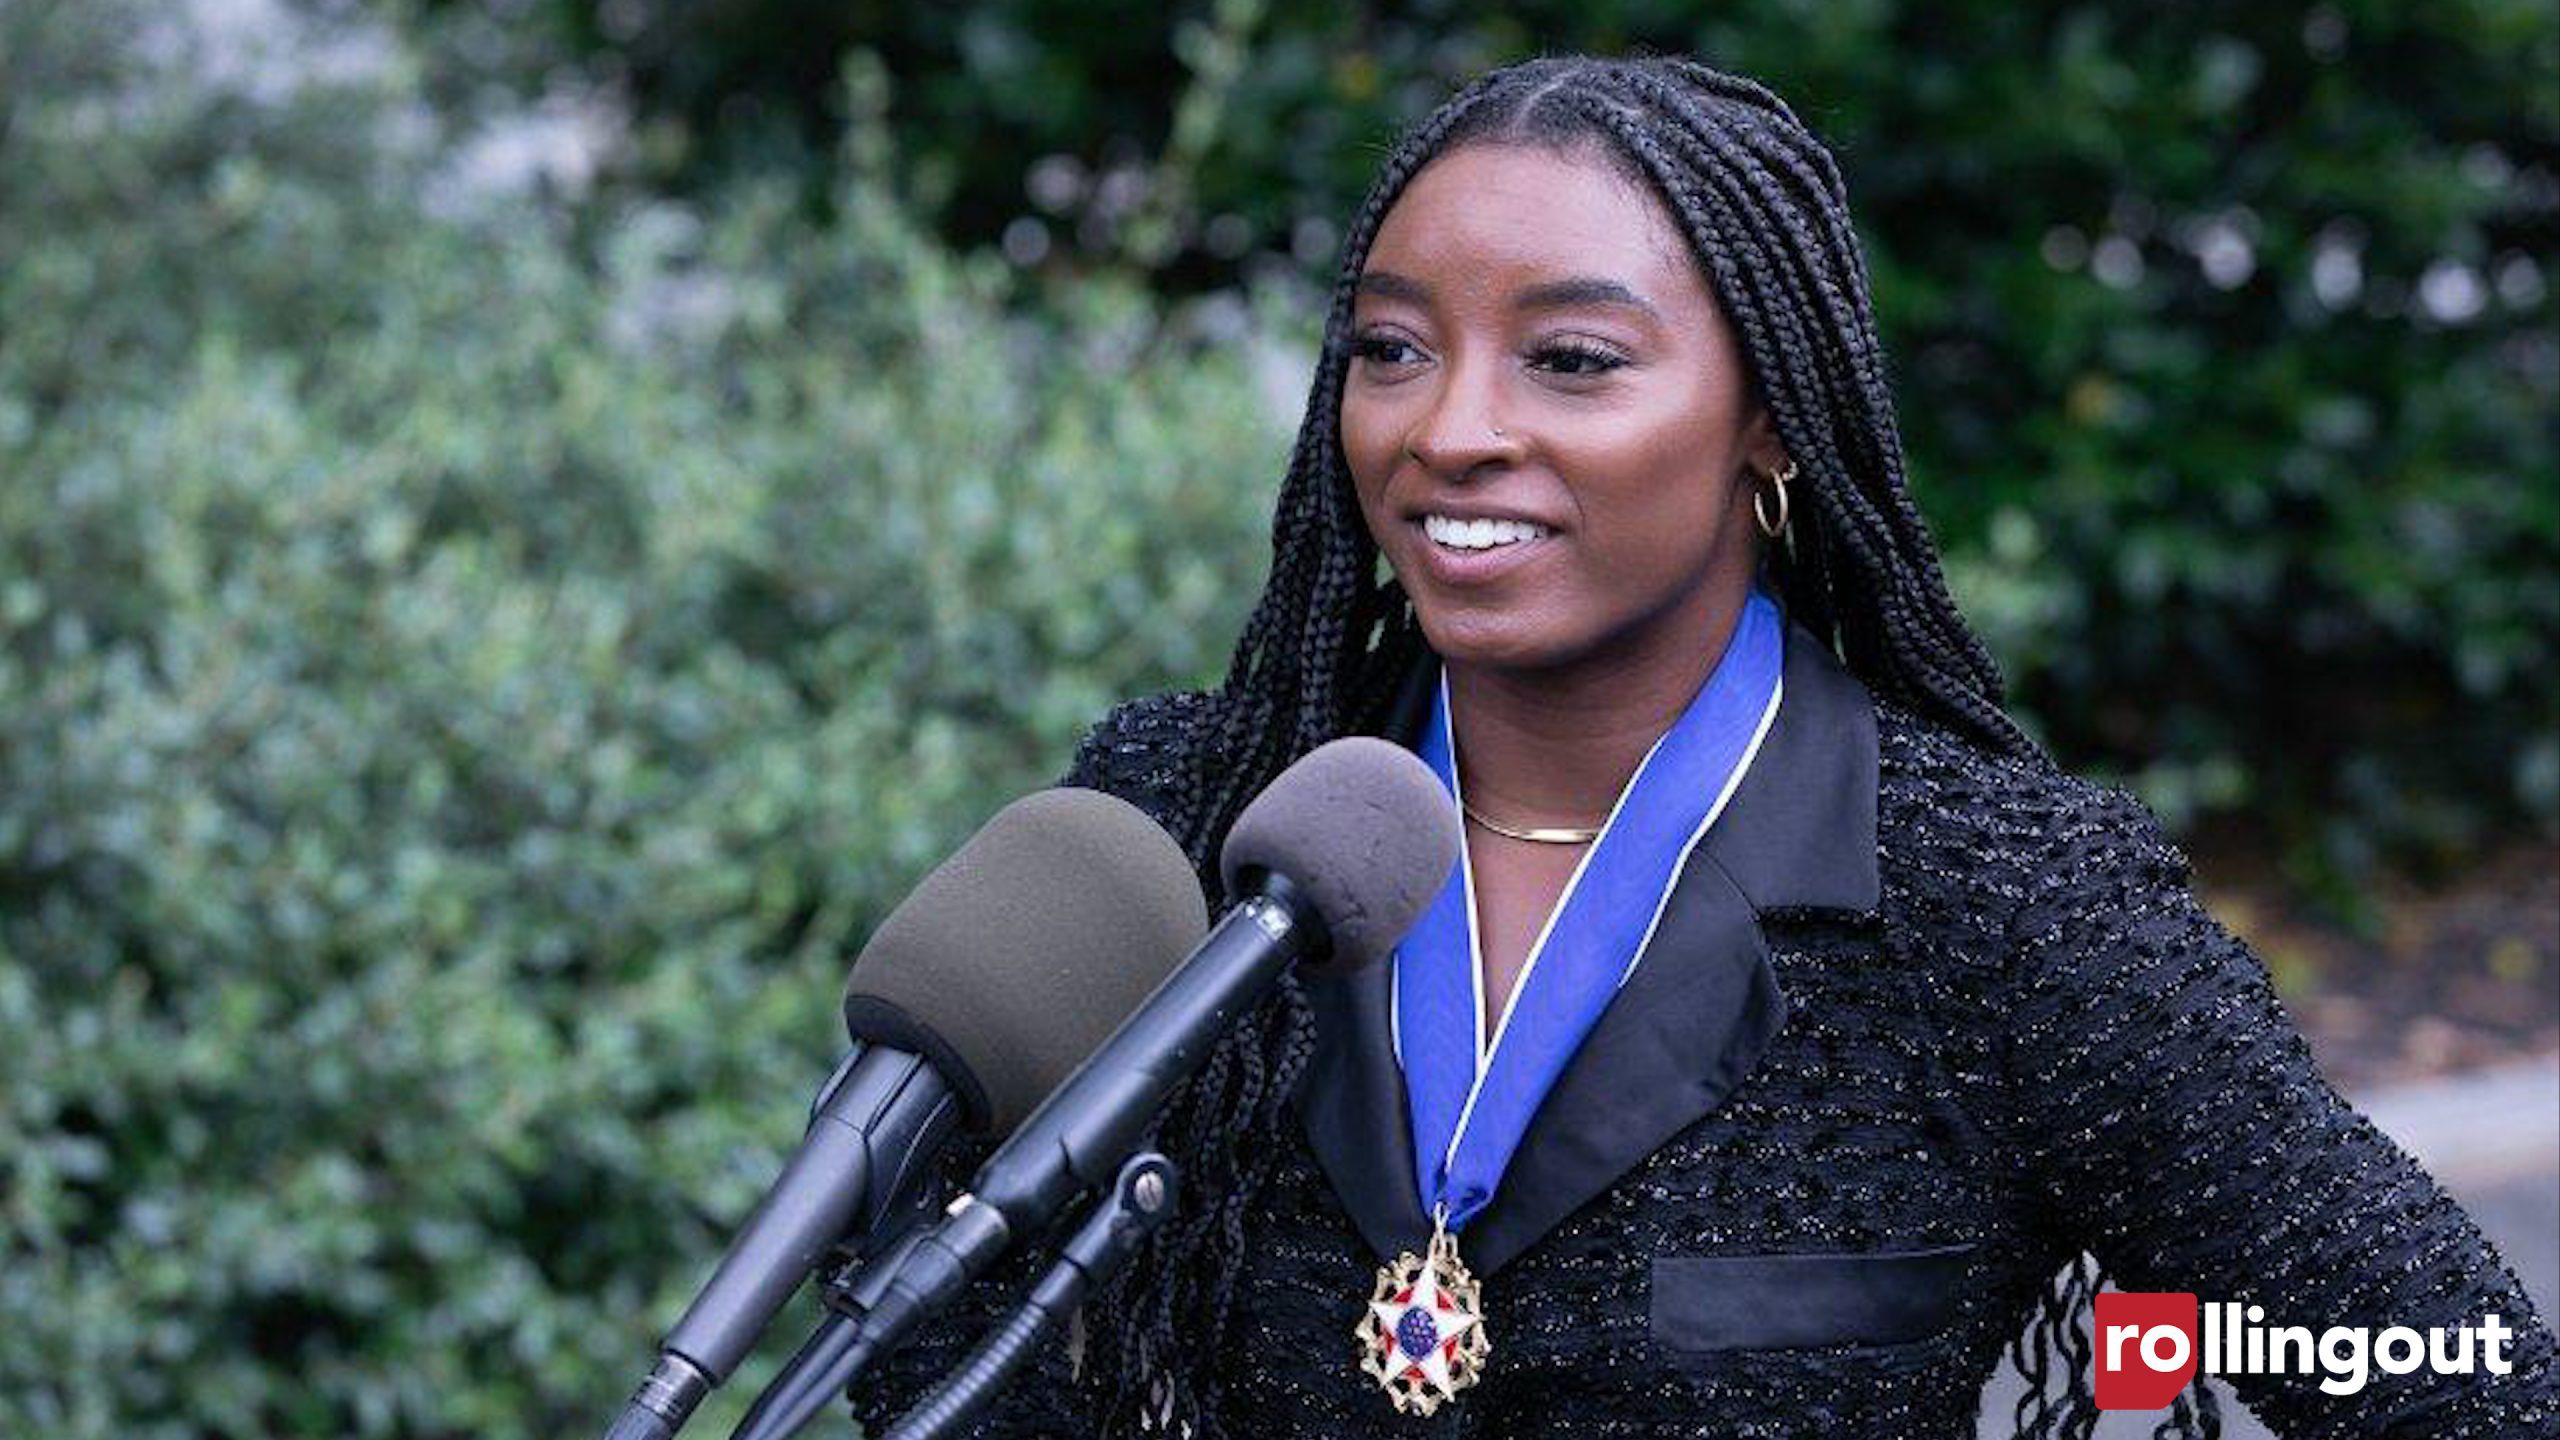 Simone Biles speaks outside the White House after receiving the Presidential Medal of Freedom. (Photo credit: Mark Mahoney for rolling out)